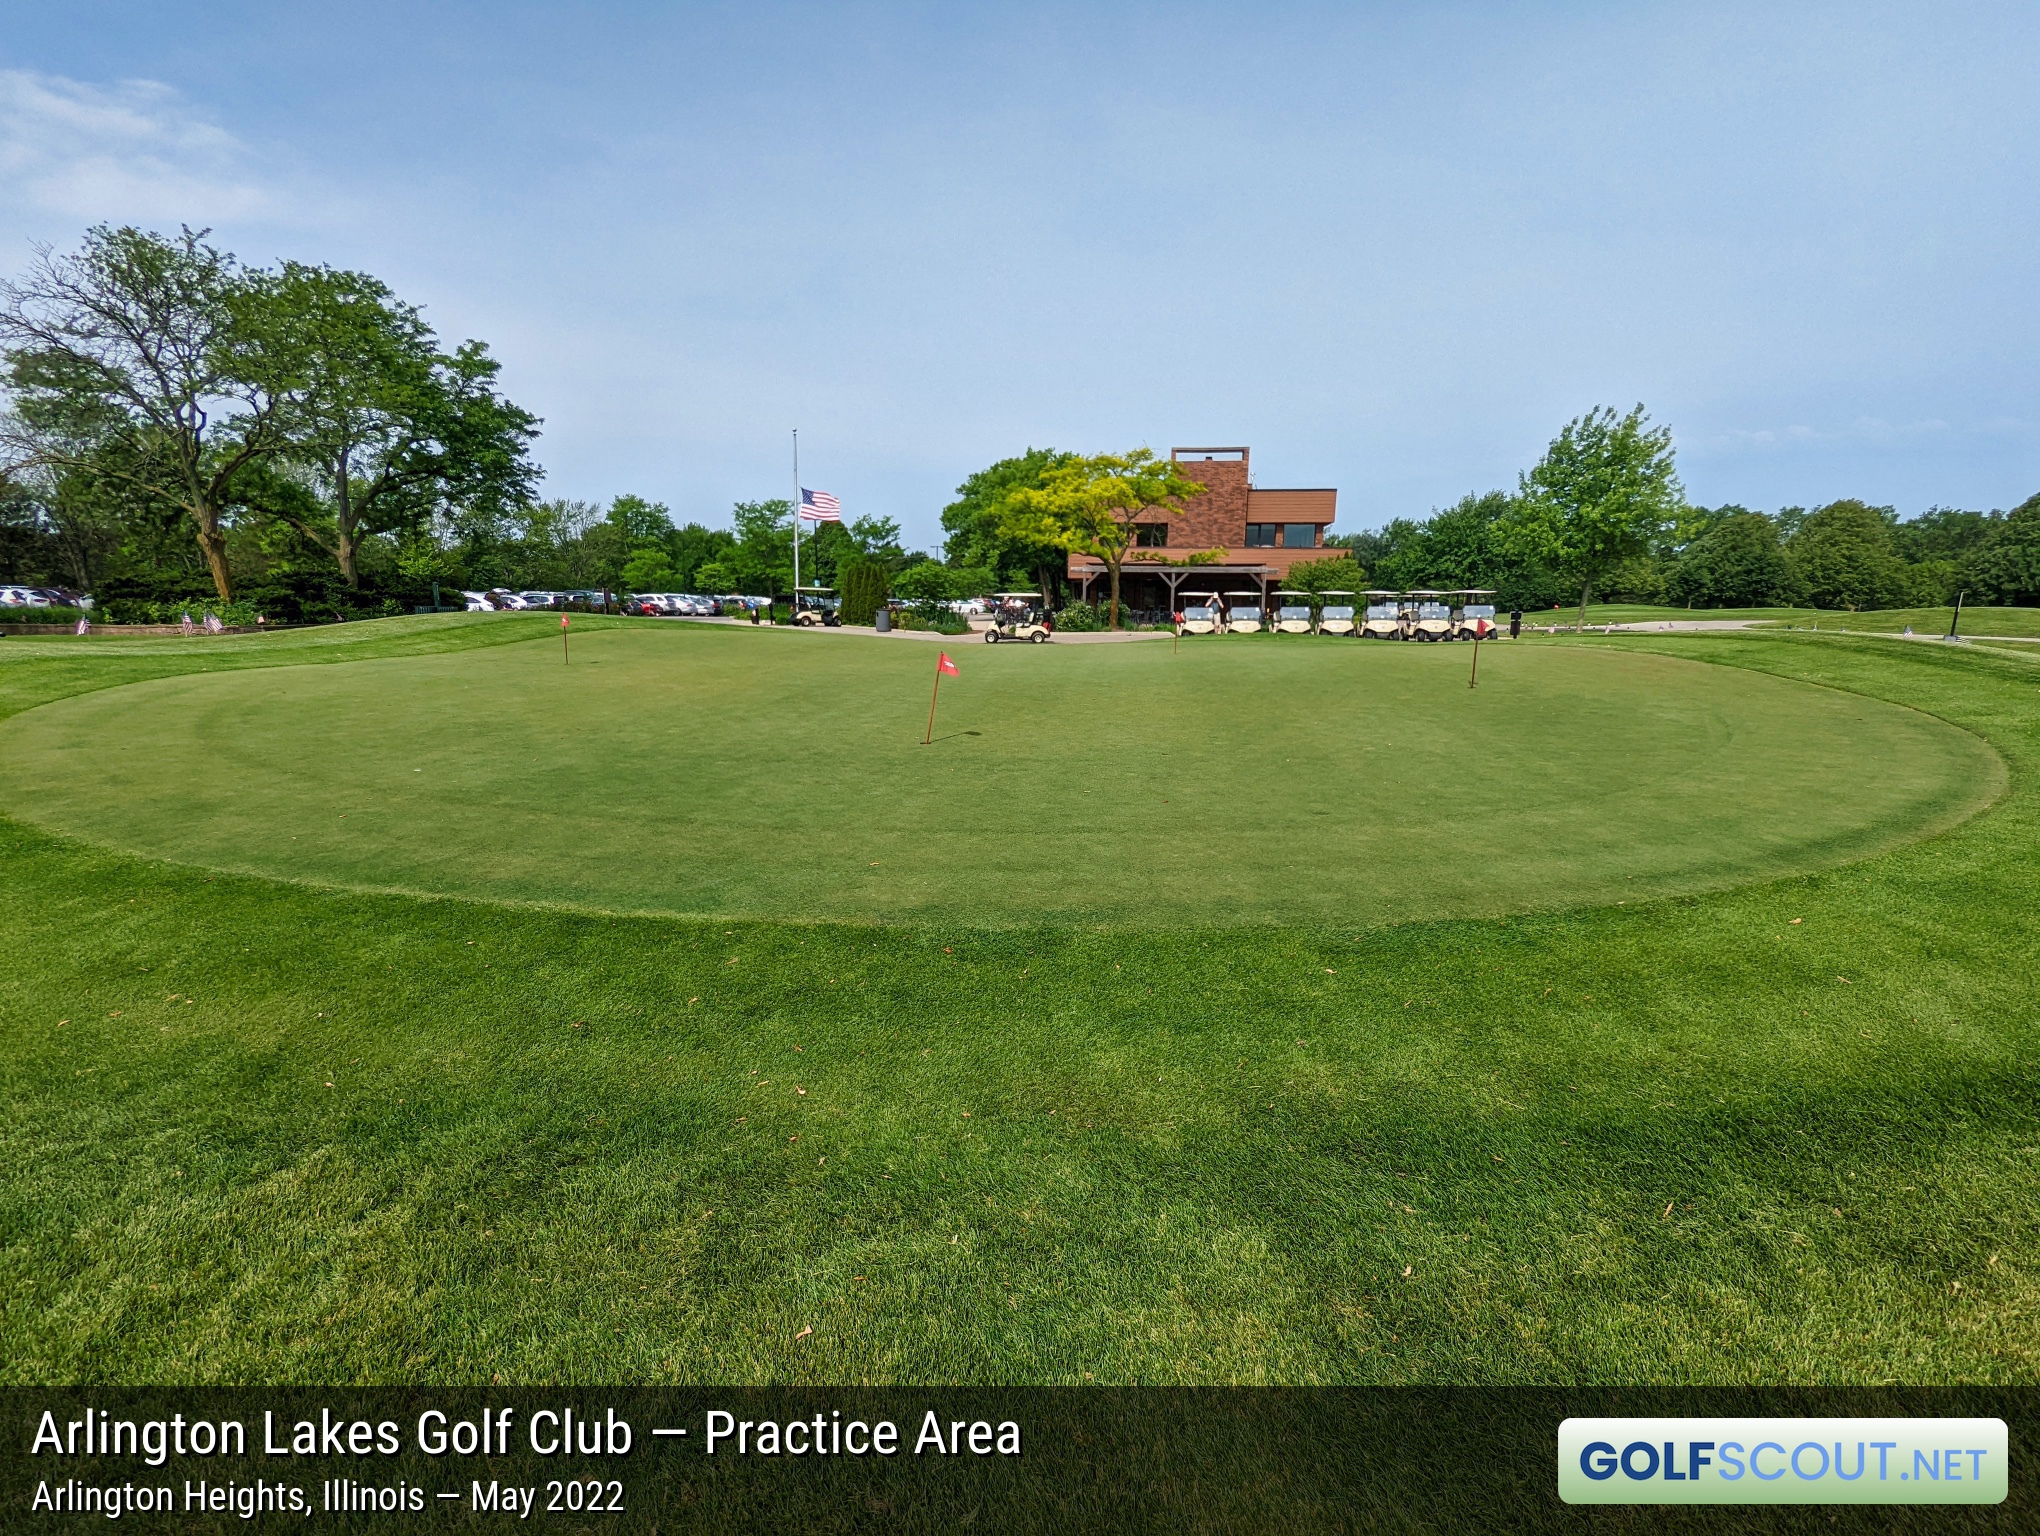 Photo of the practice area at Arlington Lakes Golf Club in Arlington Heights, Illinois. Another angle of the practice green. The green isn't huge, so it can get crowded if lots of folks want to practice.